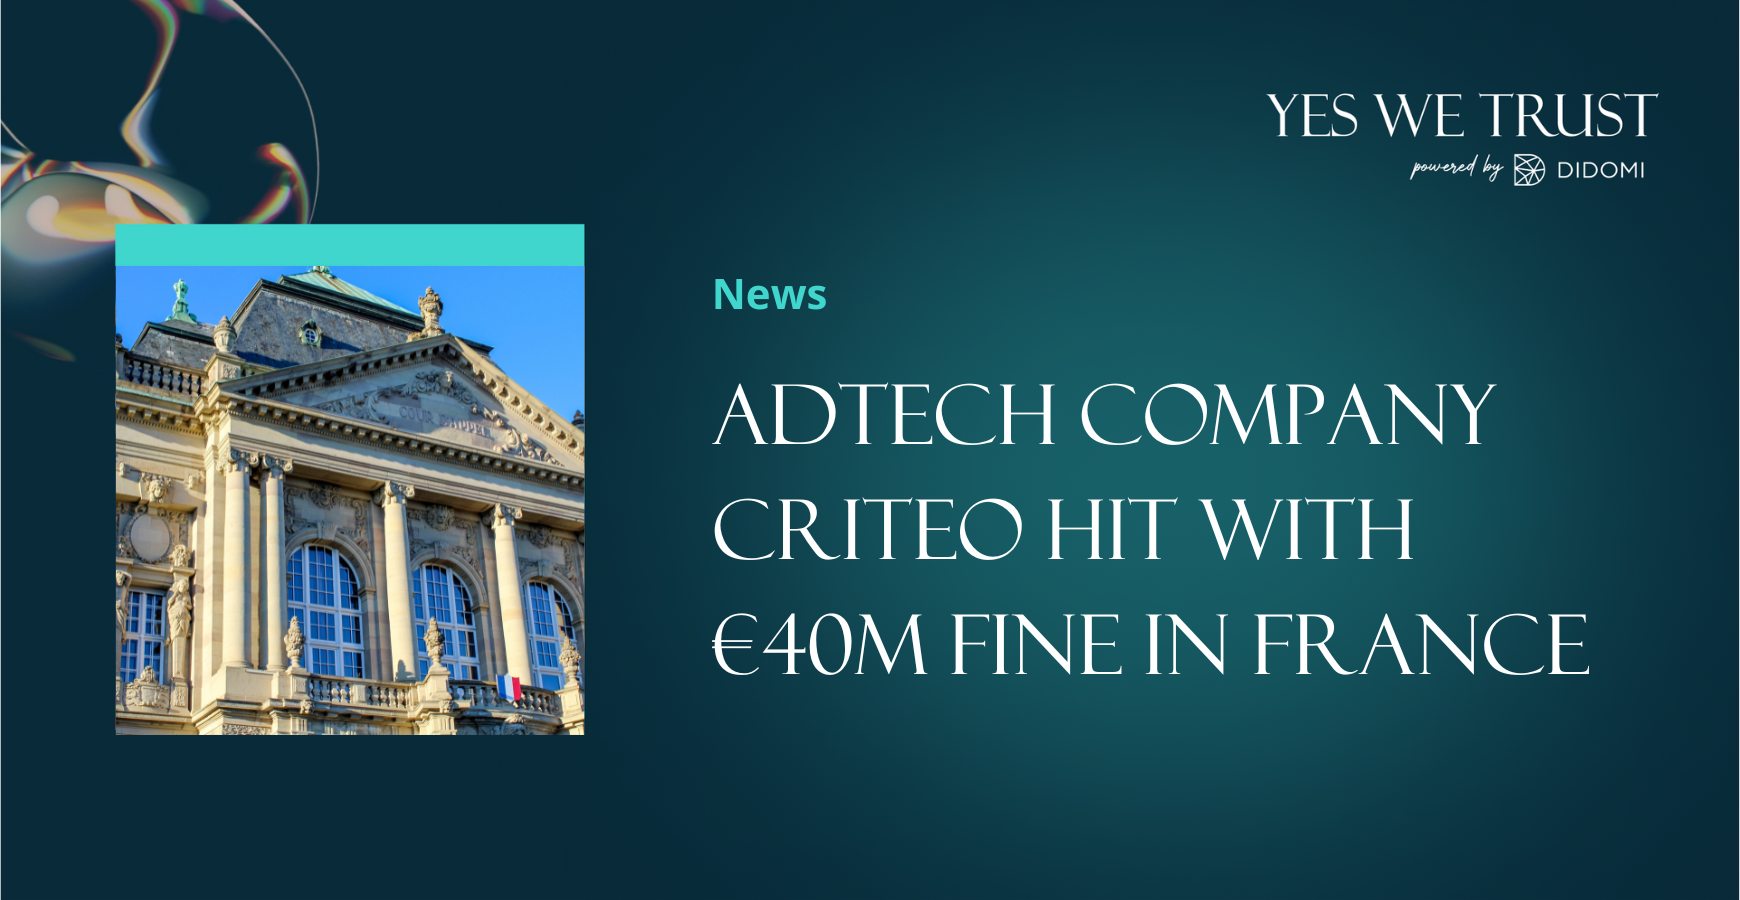 Adtech company Criteo hit with €40M fine by French DPA